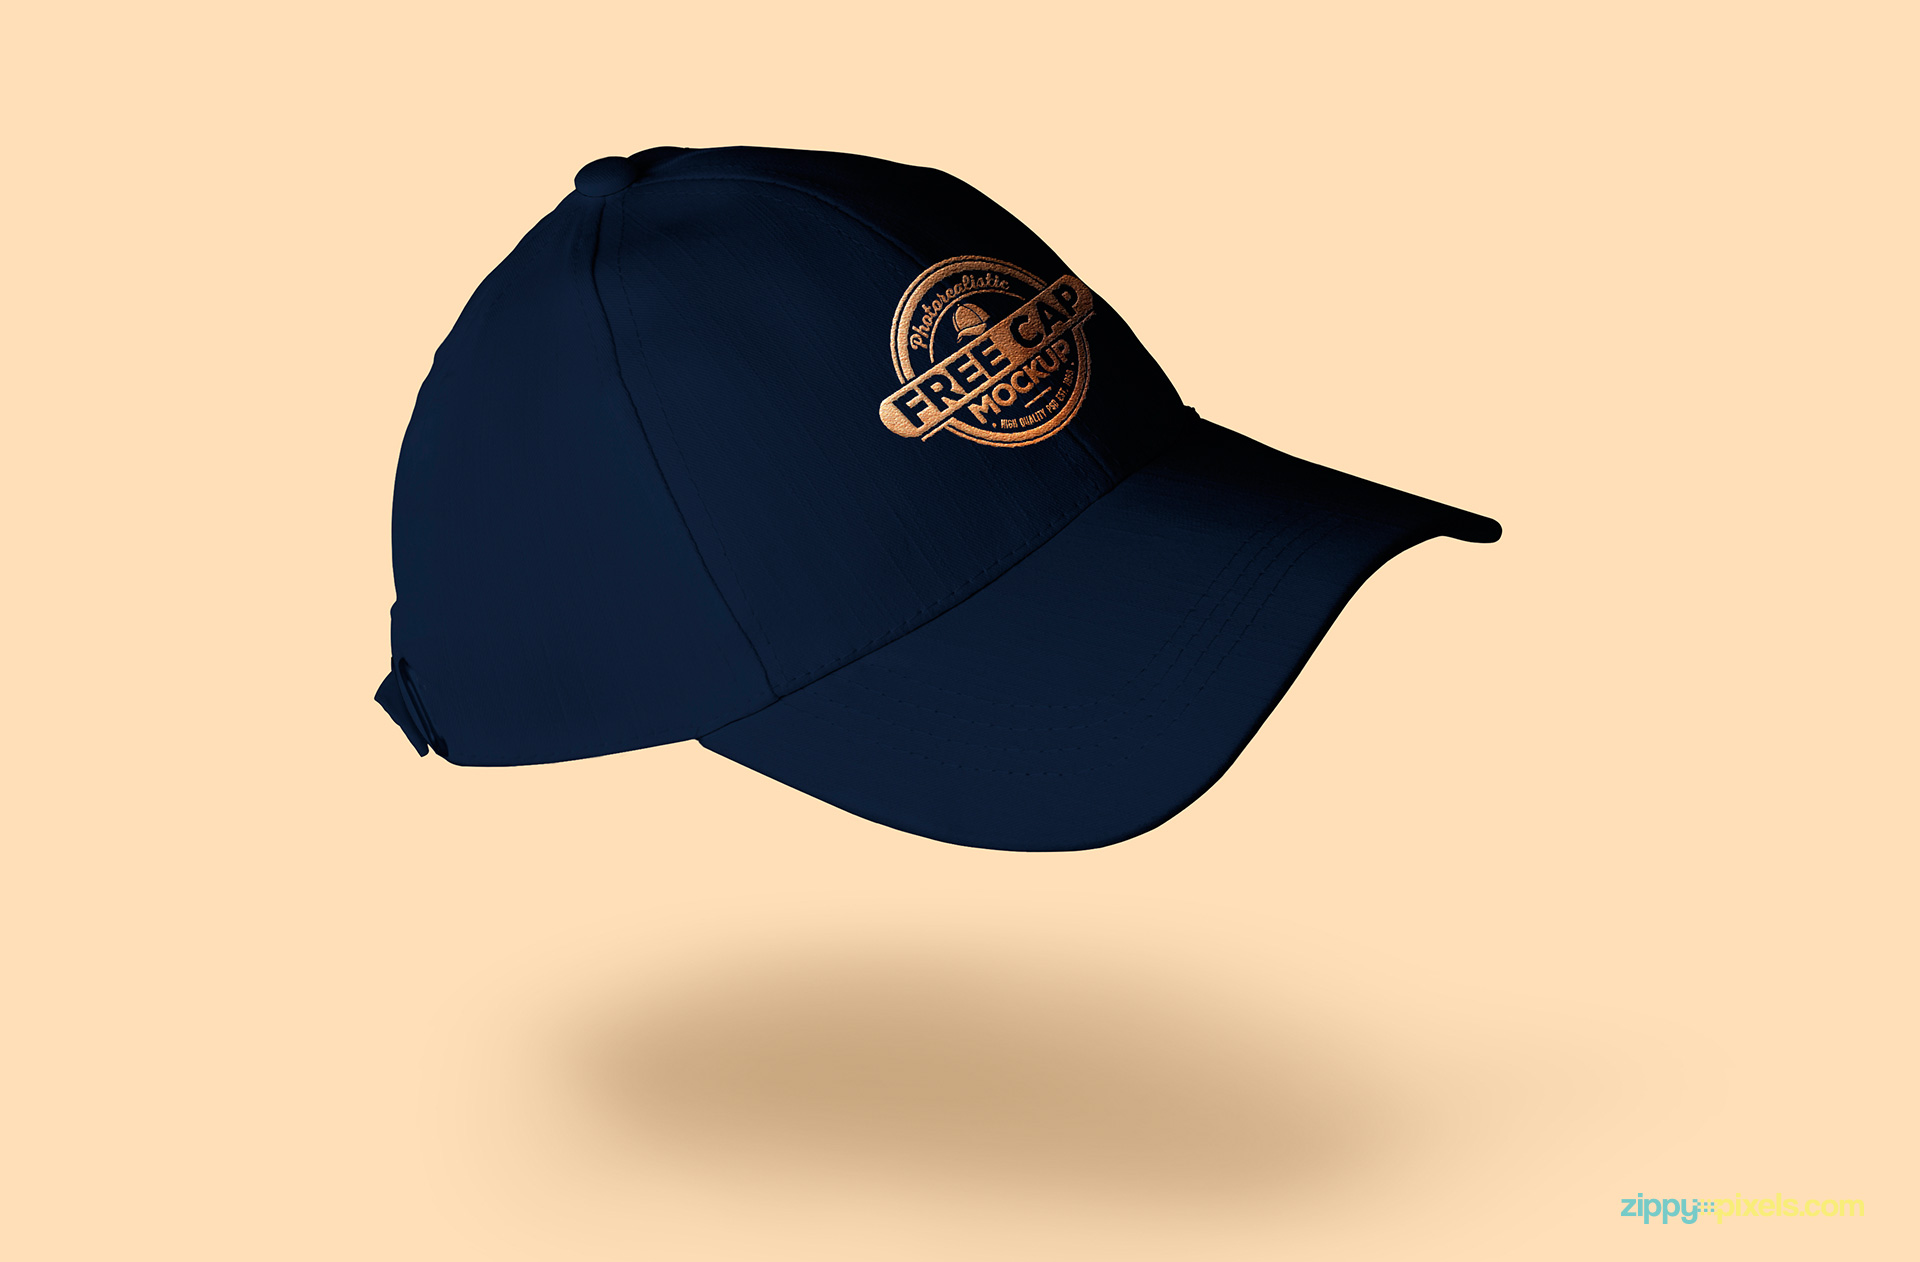 Present your designs on this awesome free baseball cap mockup.